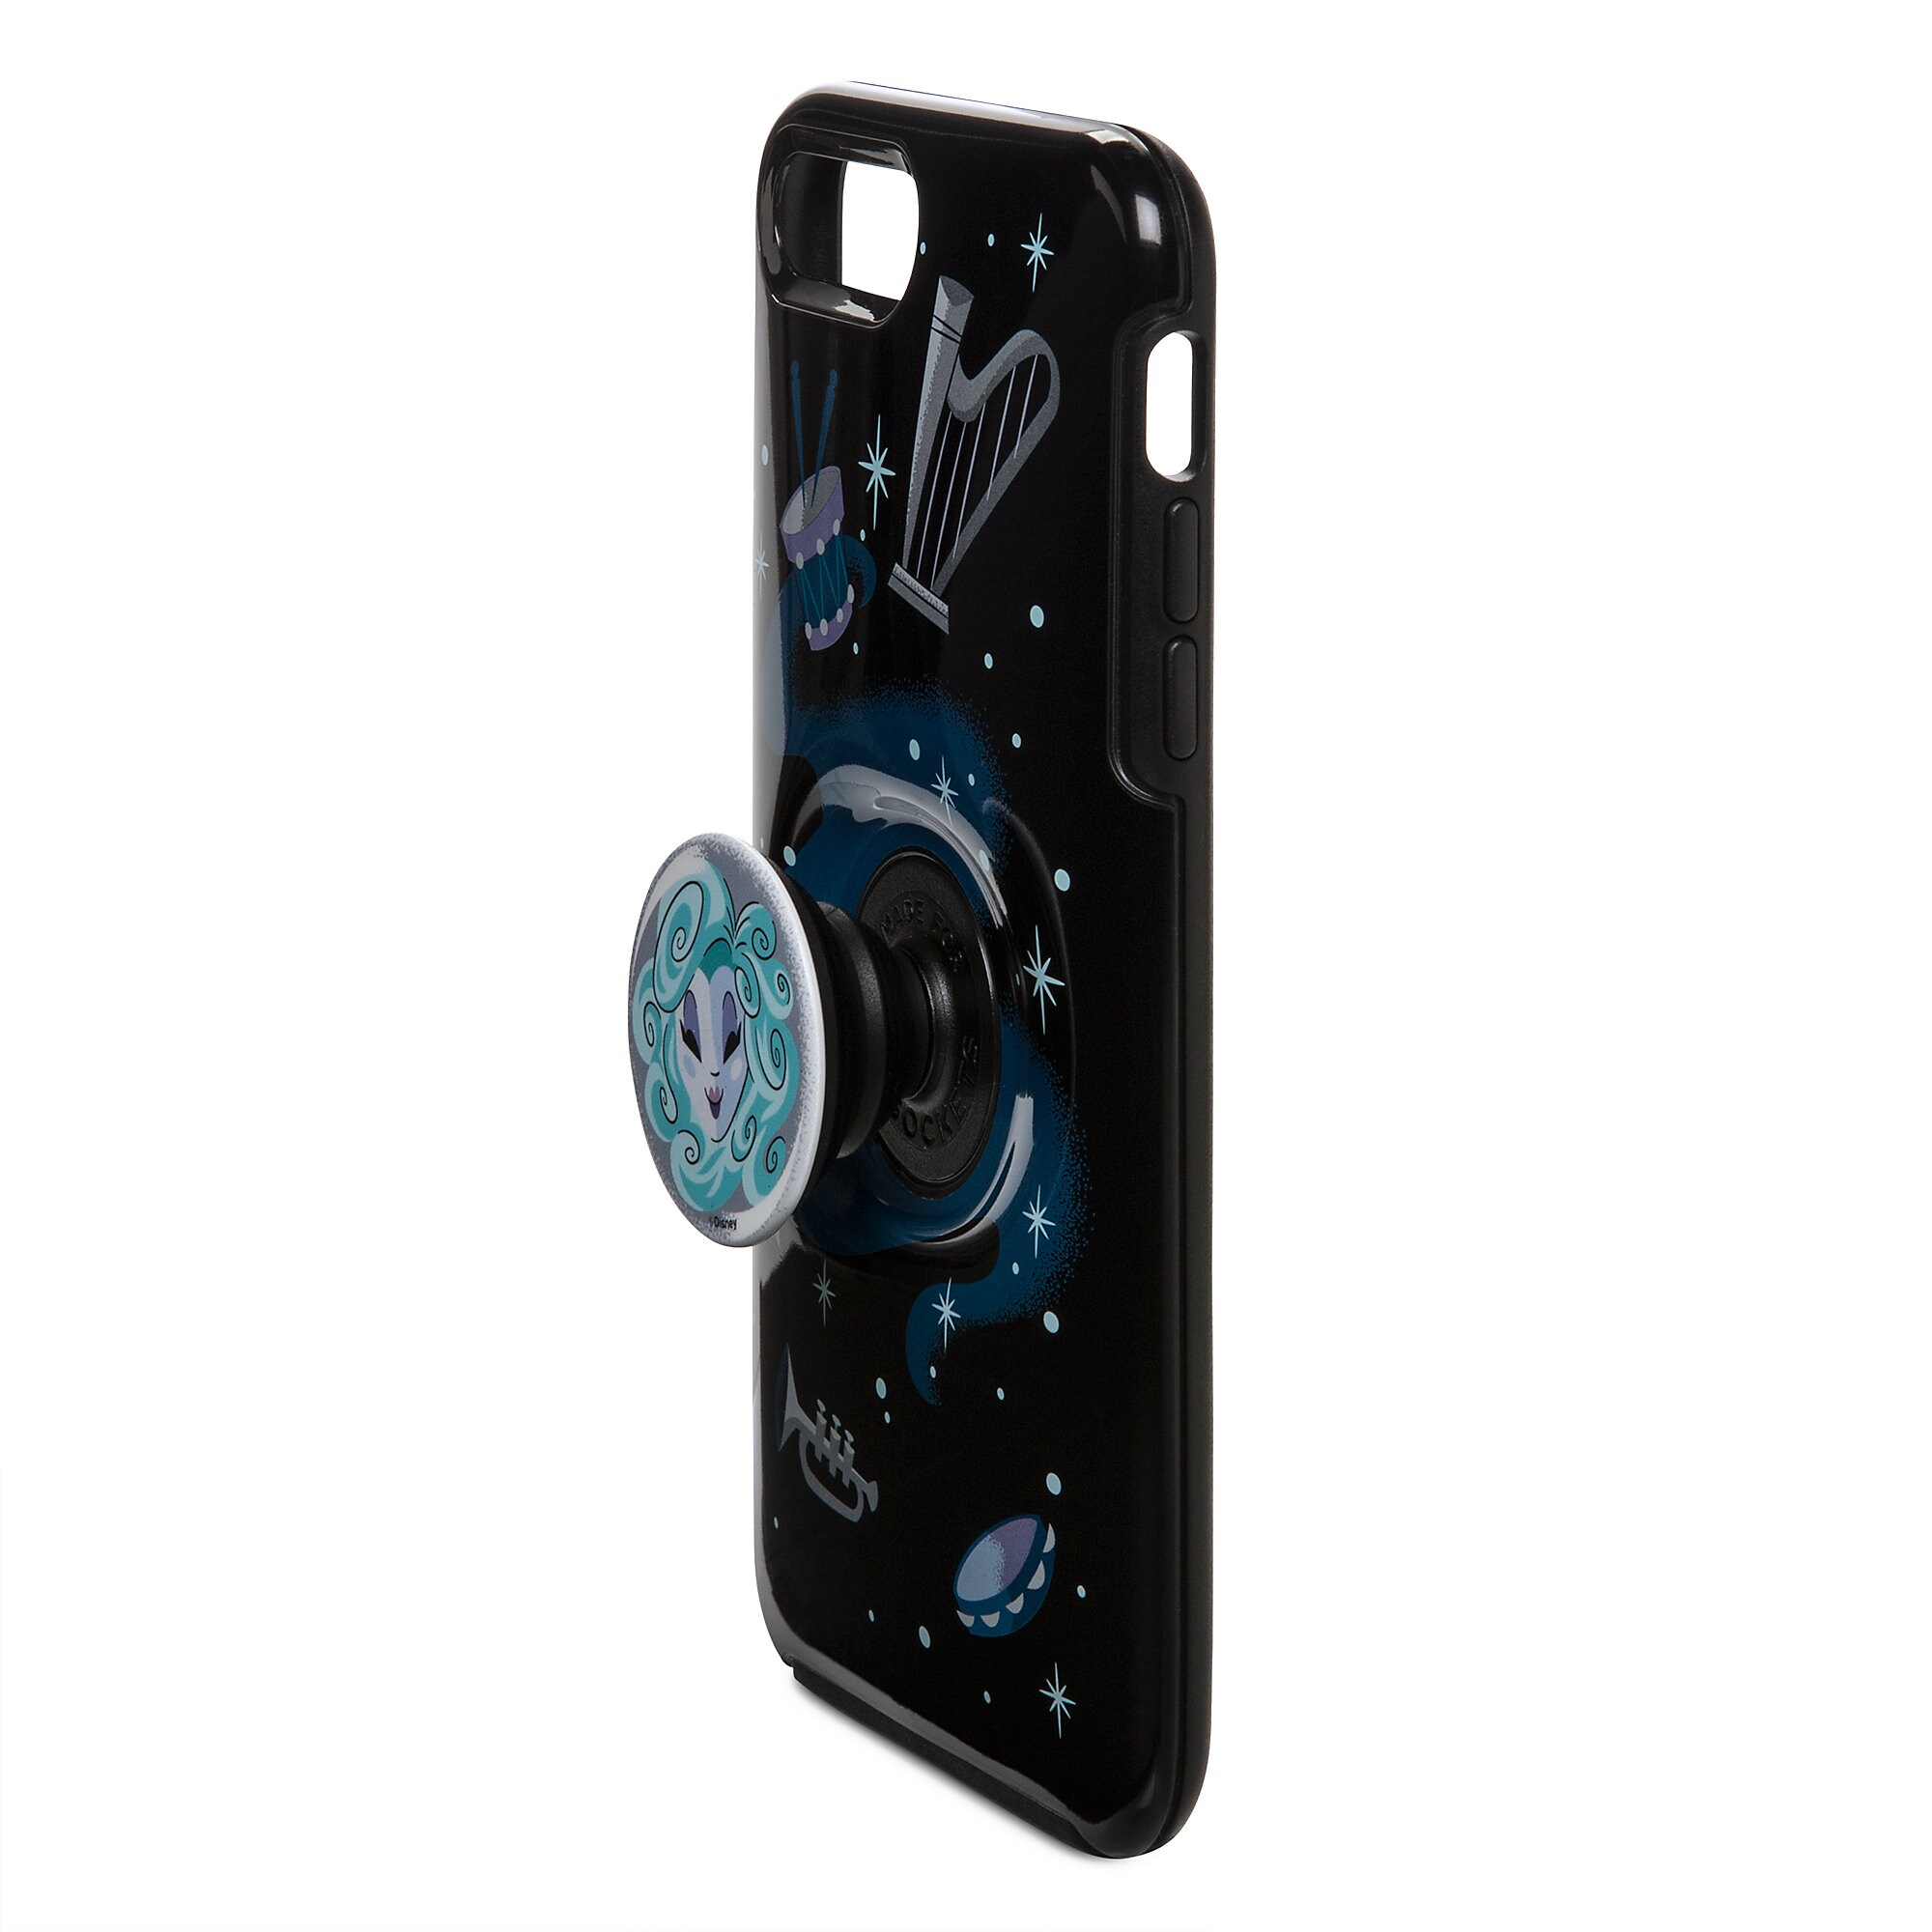 Madame Leota OtterBox iPhone 8/7 Plus Case with PopSockets PopGrip - The Haunted Mansion